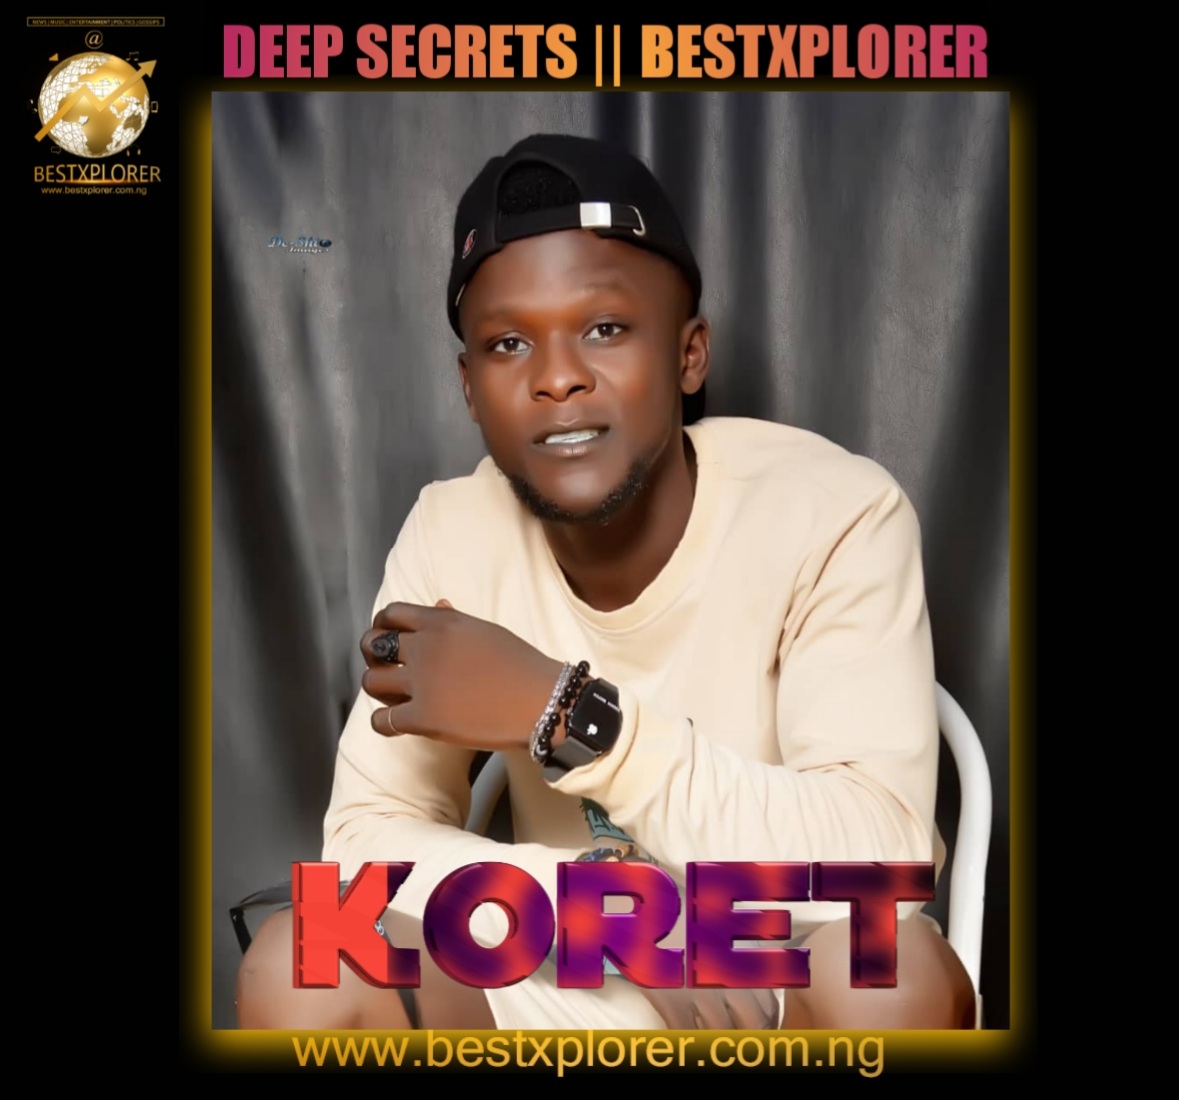 Deep Secrets: Meet Andy Koret And Know Some Of His Secrets